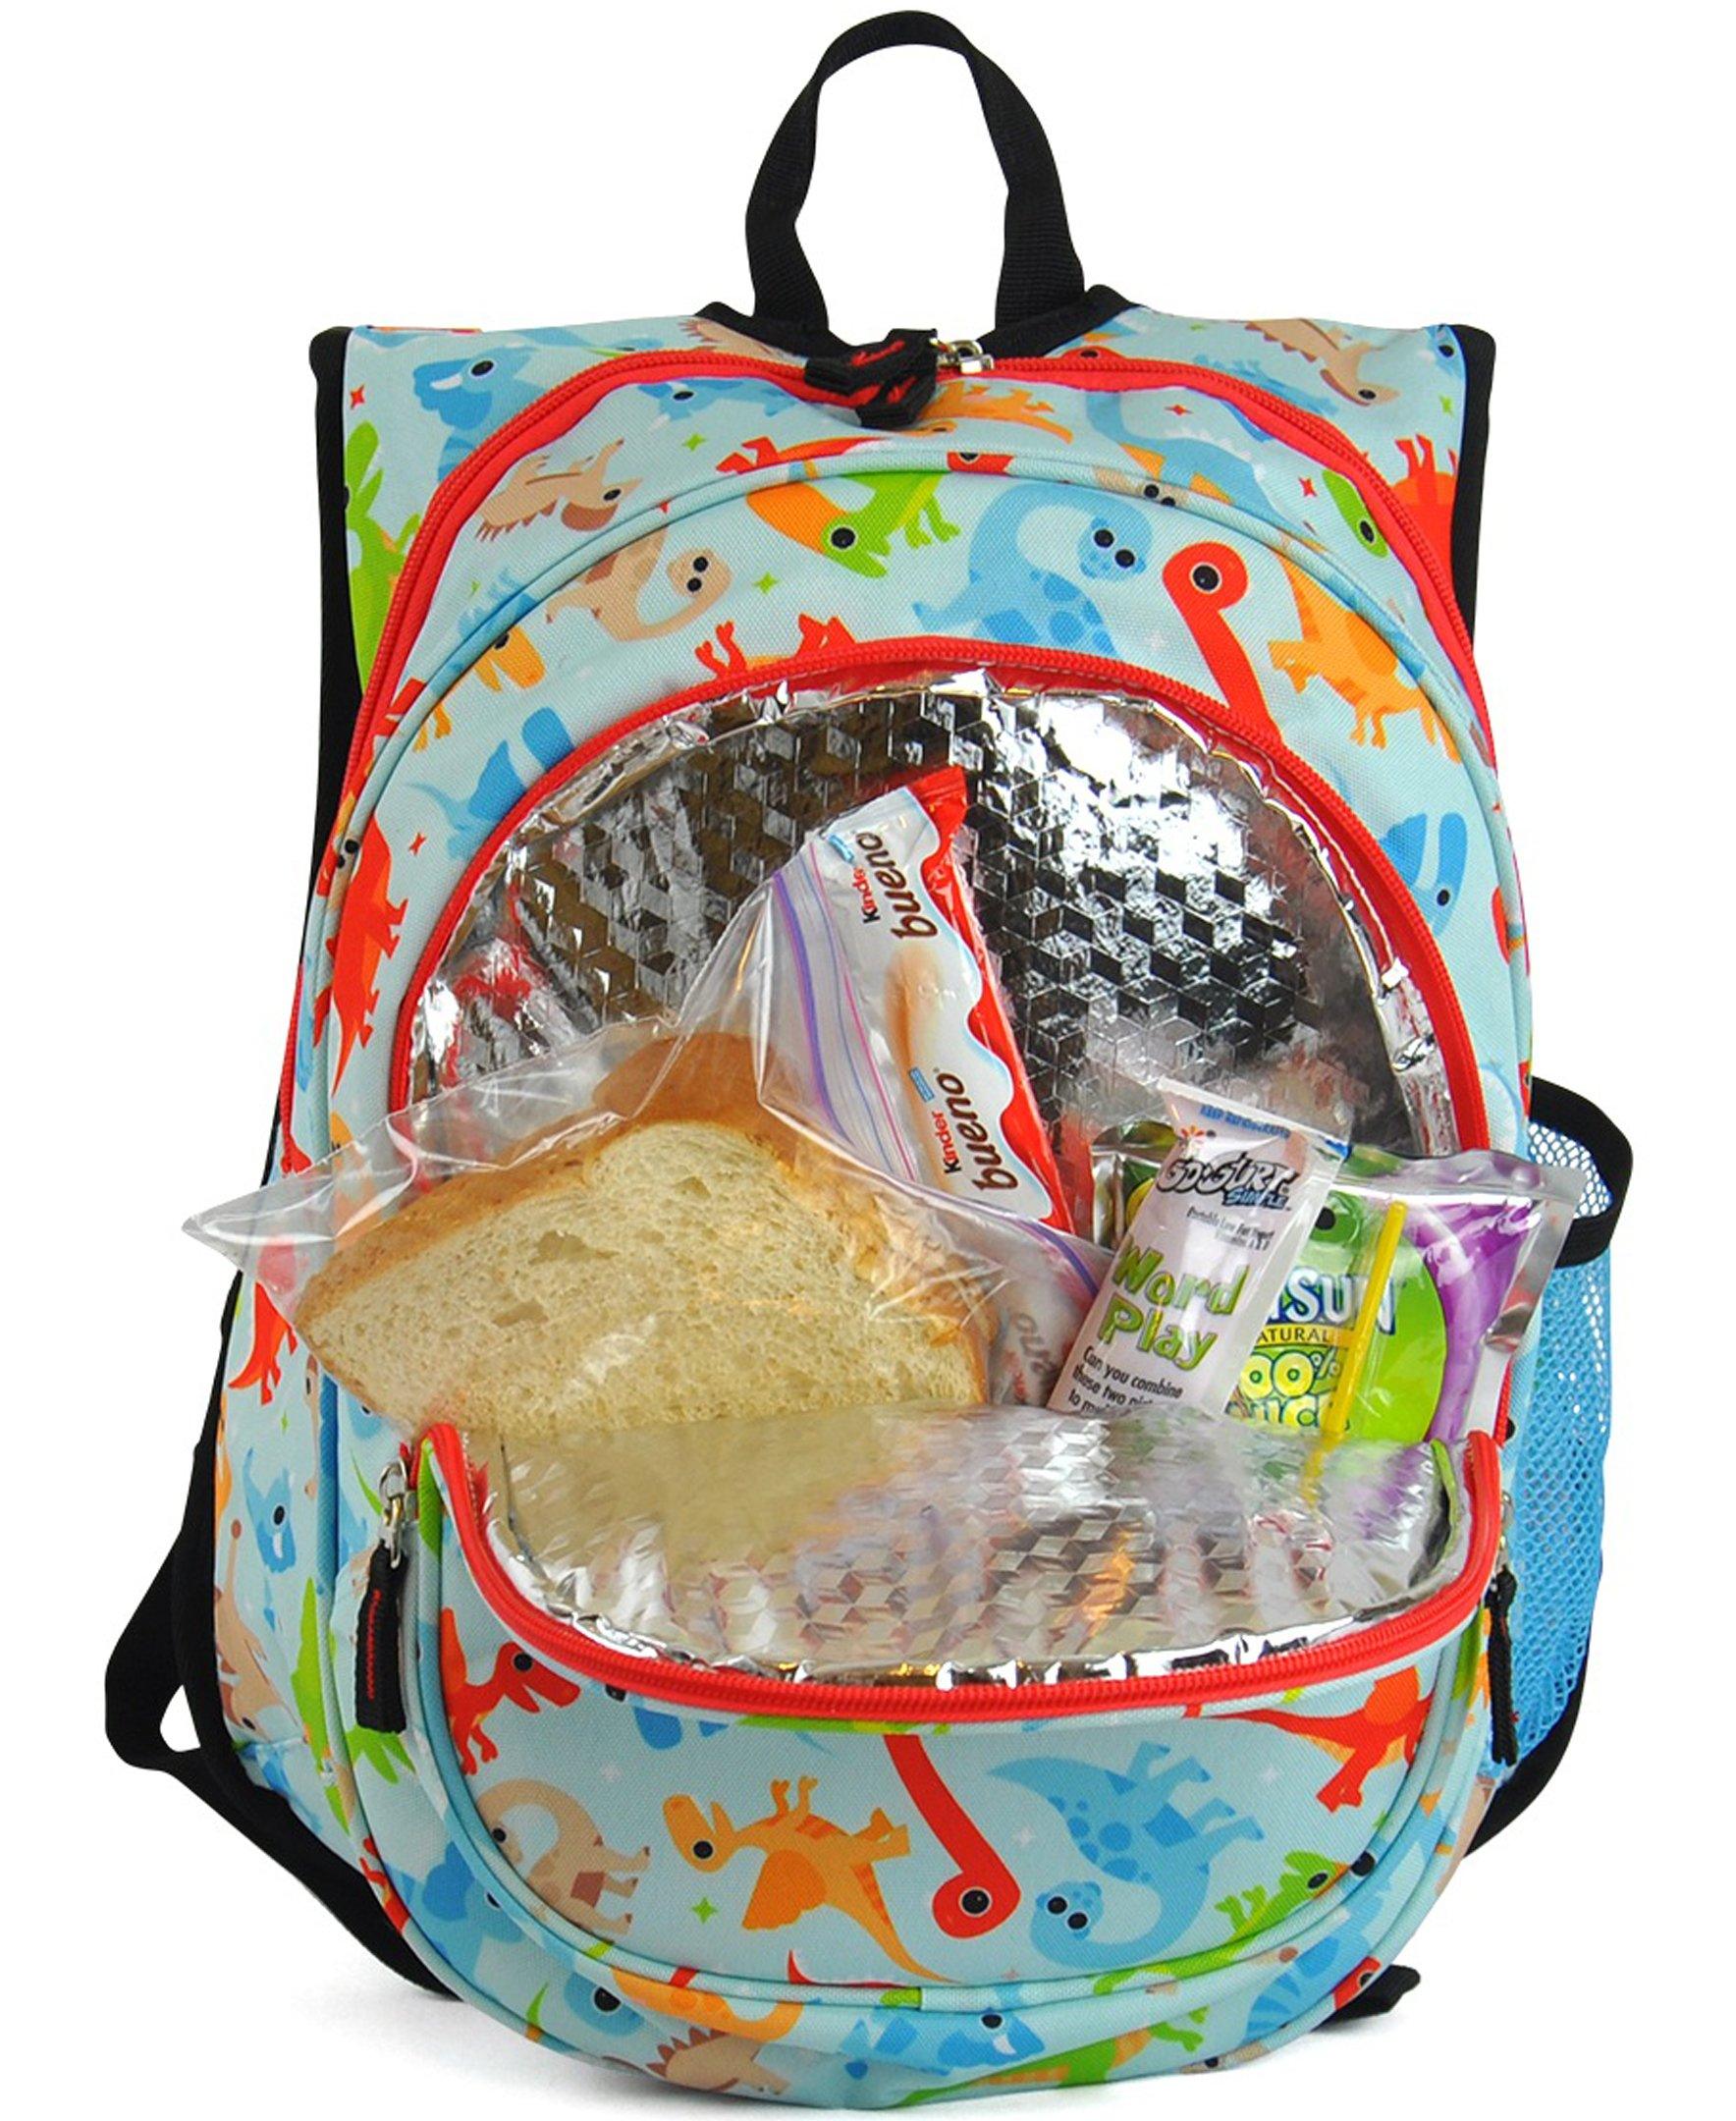 O3KCBP011 Obersee Mini Preschool All-in-One Backpack for Toddlers and Kids with integrated Insulated Cooler | Tie Dye - image 2 of 3